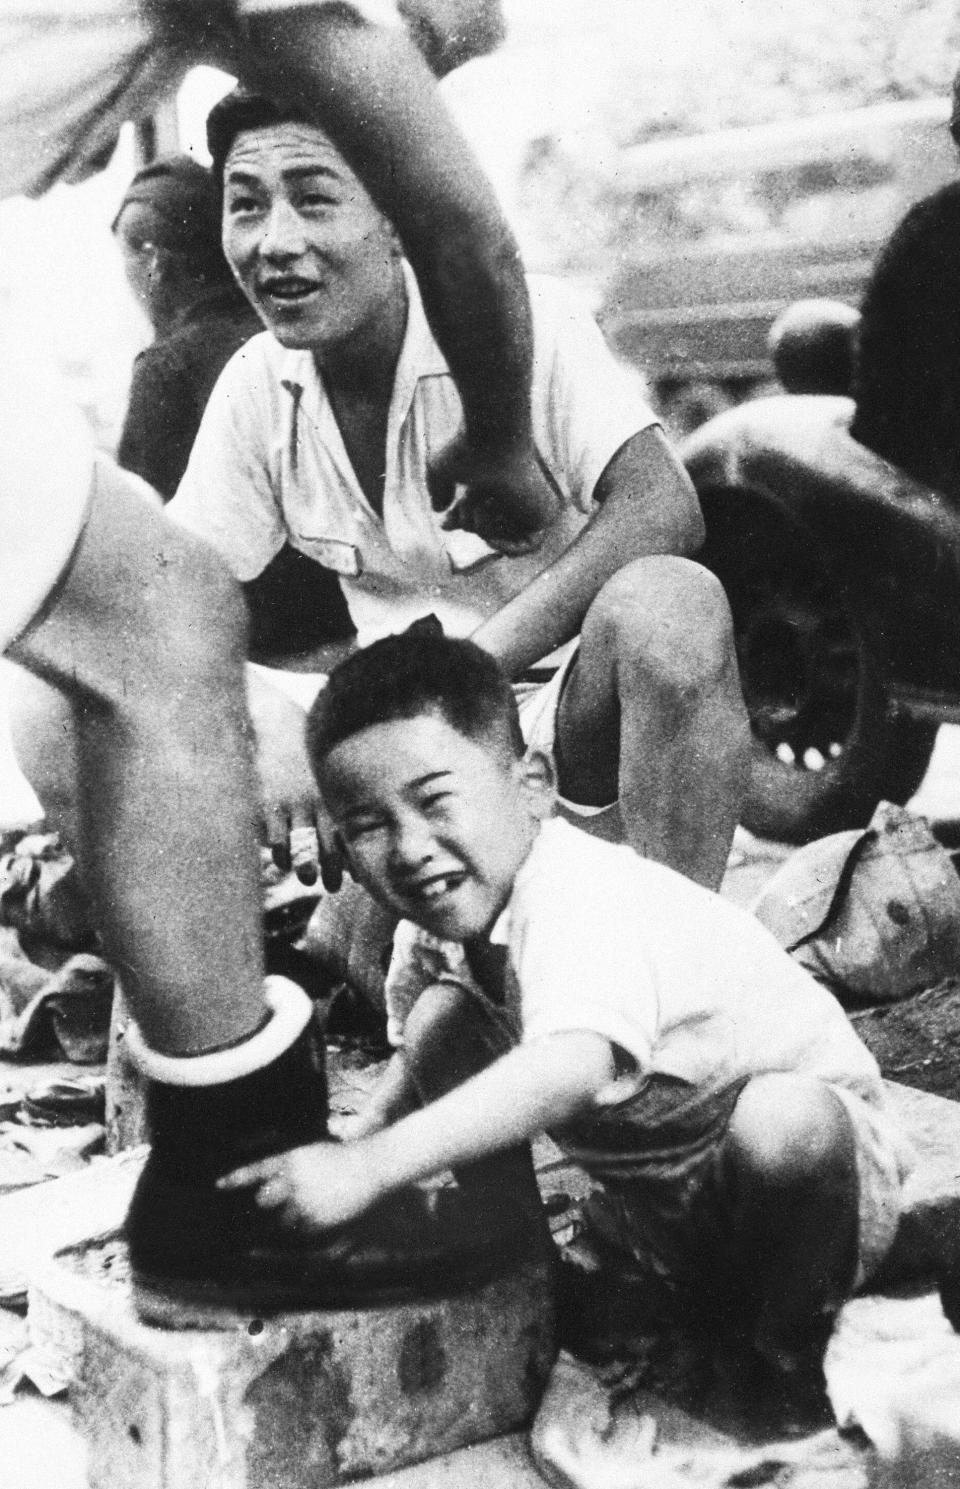 A war orphan polishes shoes in downtown Tokyo on Aug. 1, 1946. In Japan, war orphans were punished for surviving. They were bullied. They were called trash, sometimes rounded up by police and put in cages. Some were sent to institutions or sold for labor. They were targets of abuse and discrimination. A 1948 government survey found there were more than 123,500 war orphans nationwide. But orphanages were built for only for 12,000, leaving many homeless. (Kyodo News via AP)